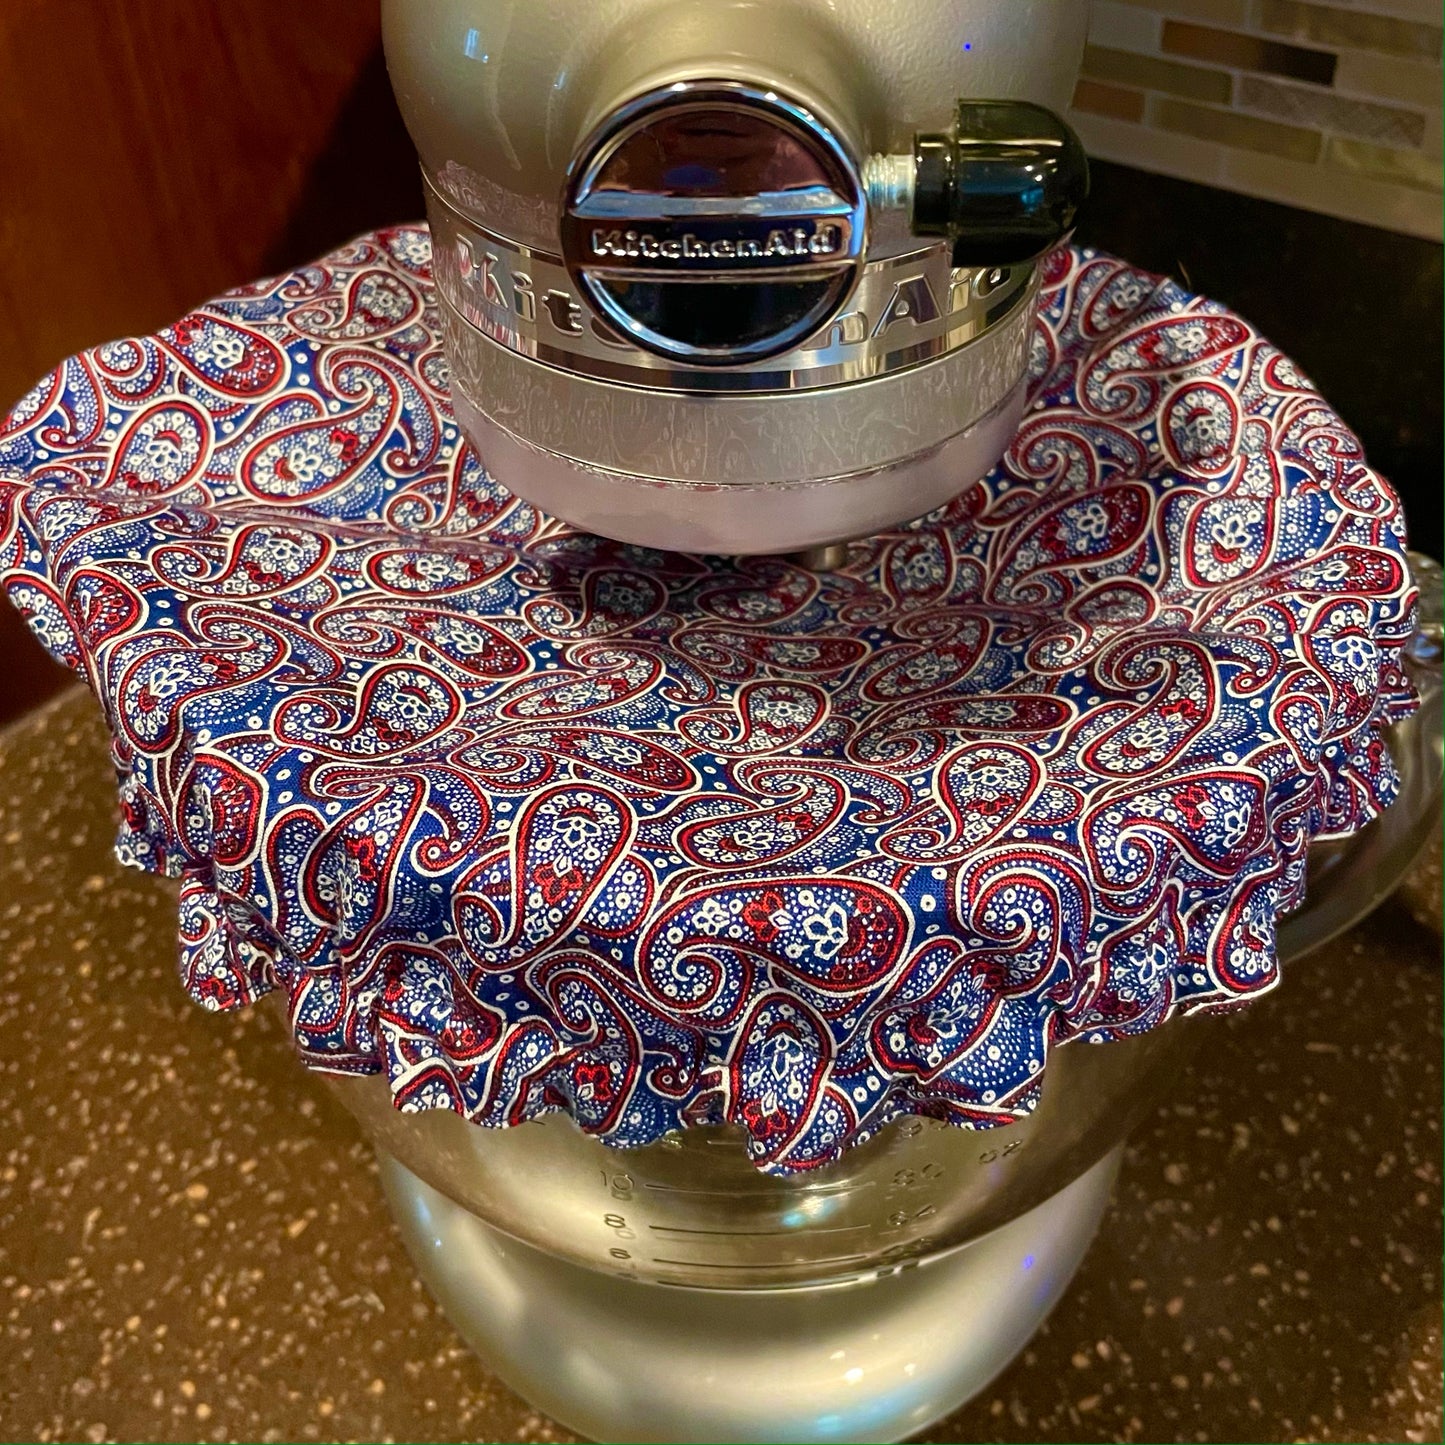 Stand Mixer Bowl Covers - Red White and Blue Paisley